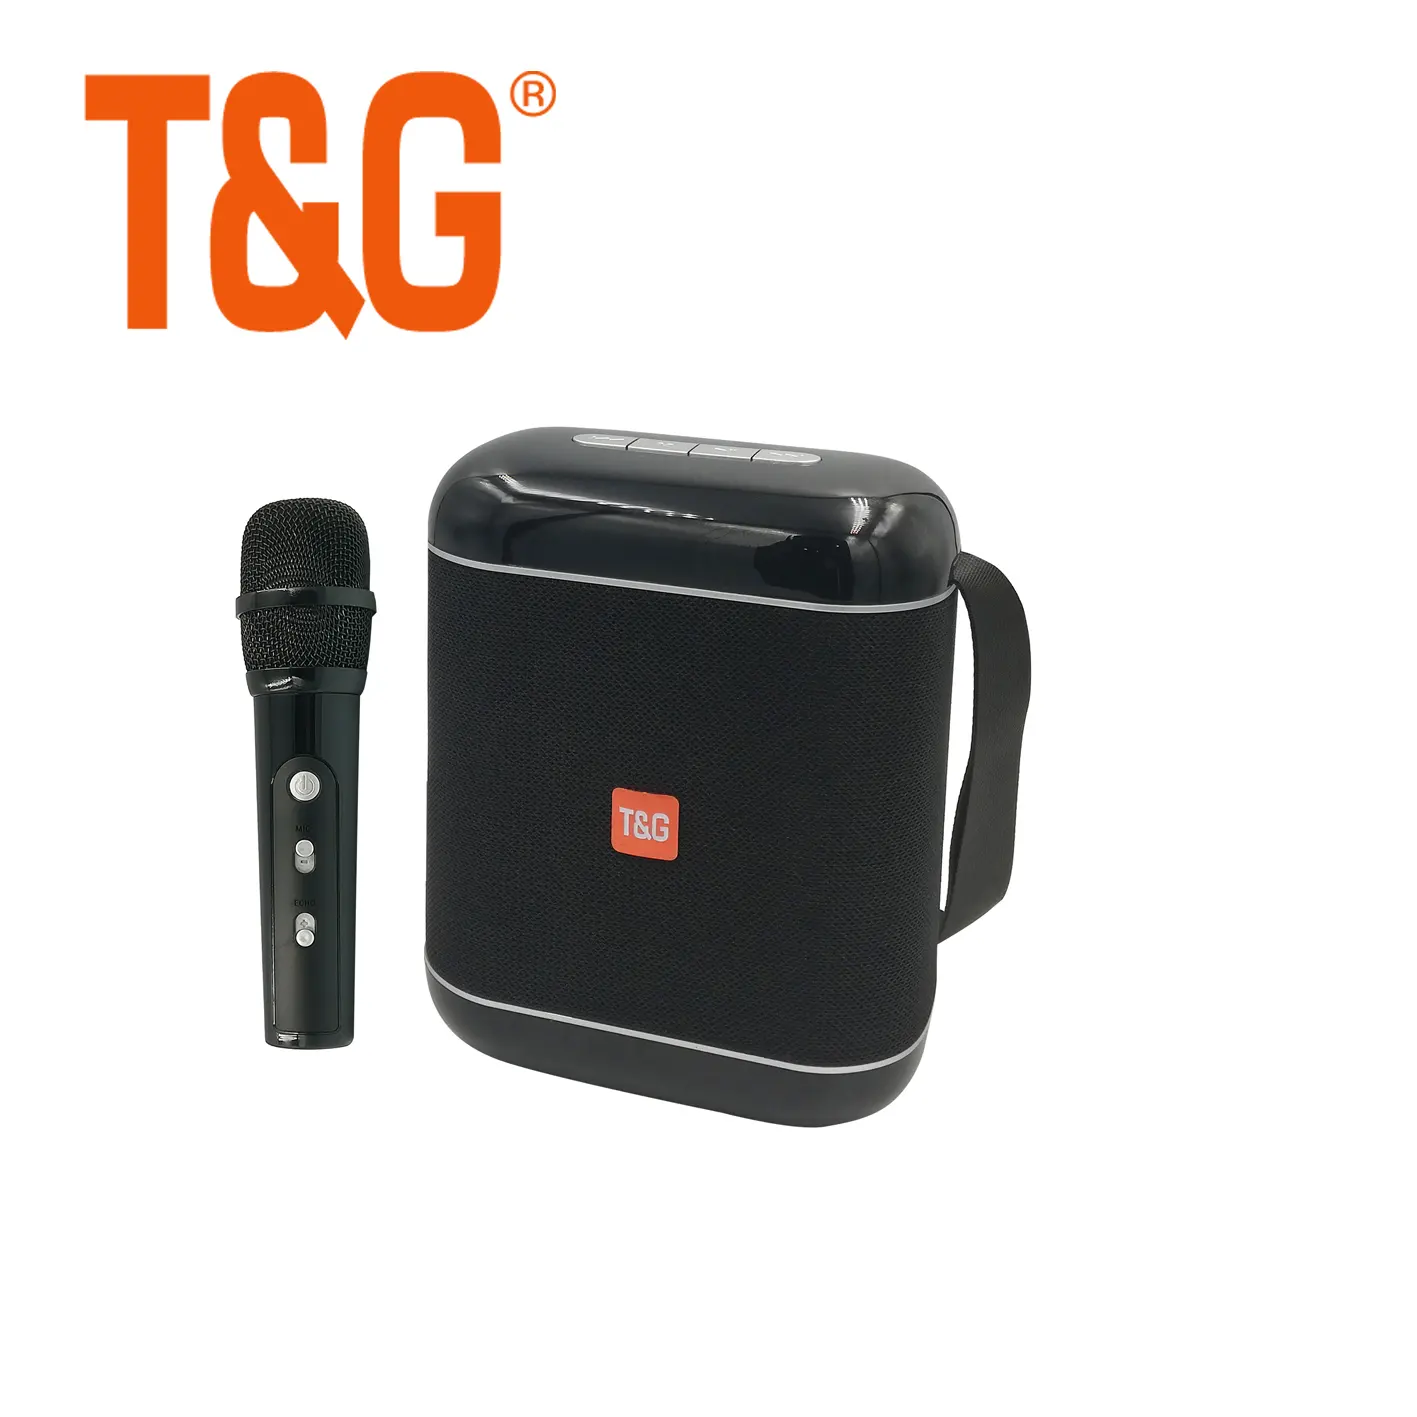 TG523K 2020 New Arrival Outdoor Portable Wireless Multimedia BT Speaker With microphone latest technology